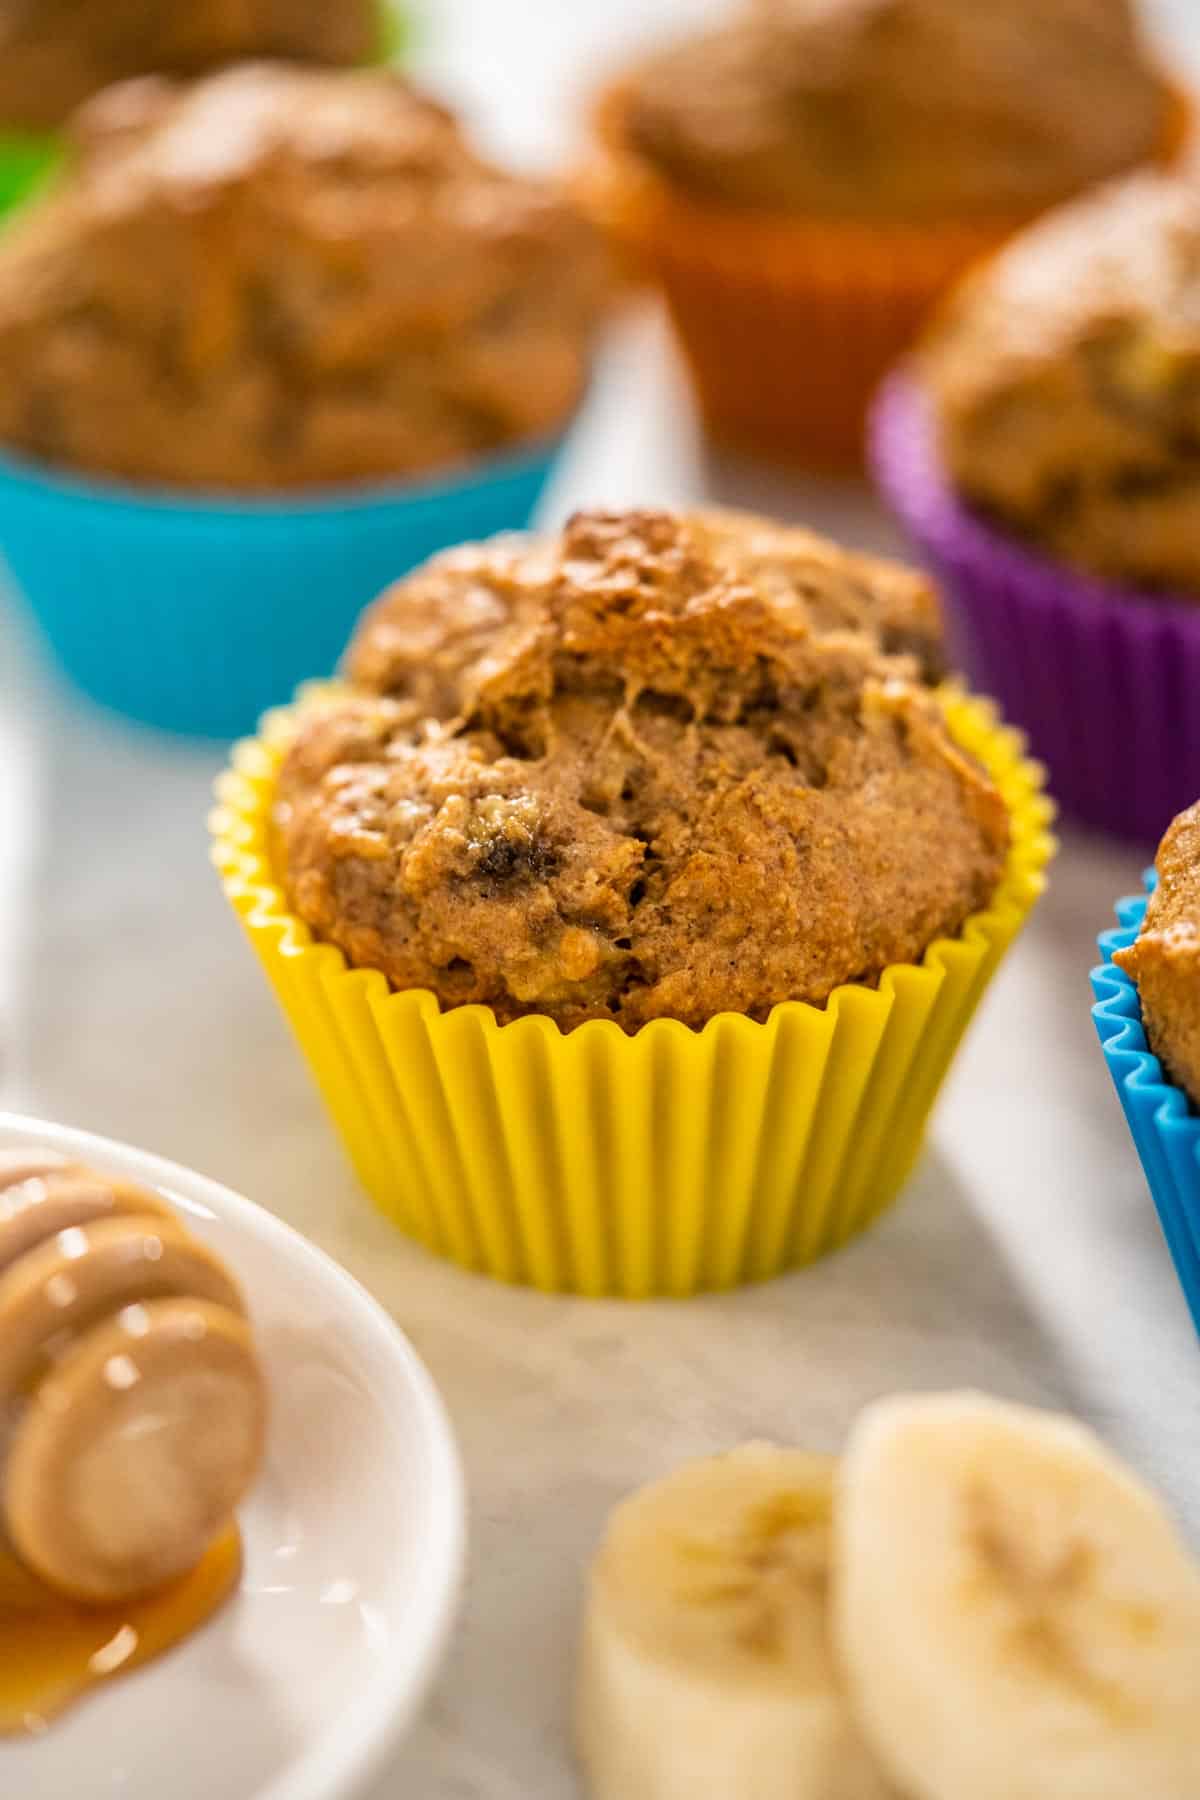 A Almond Flour Banana Muffin in a yellow muffin line with colorful muffins in the background.